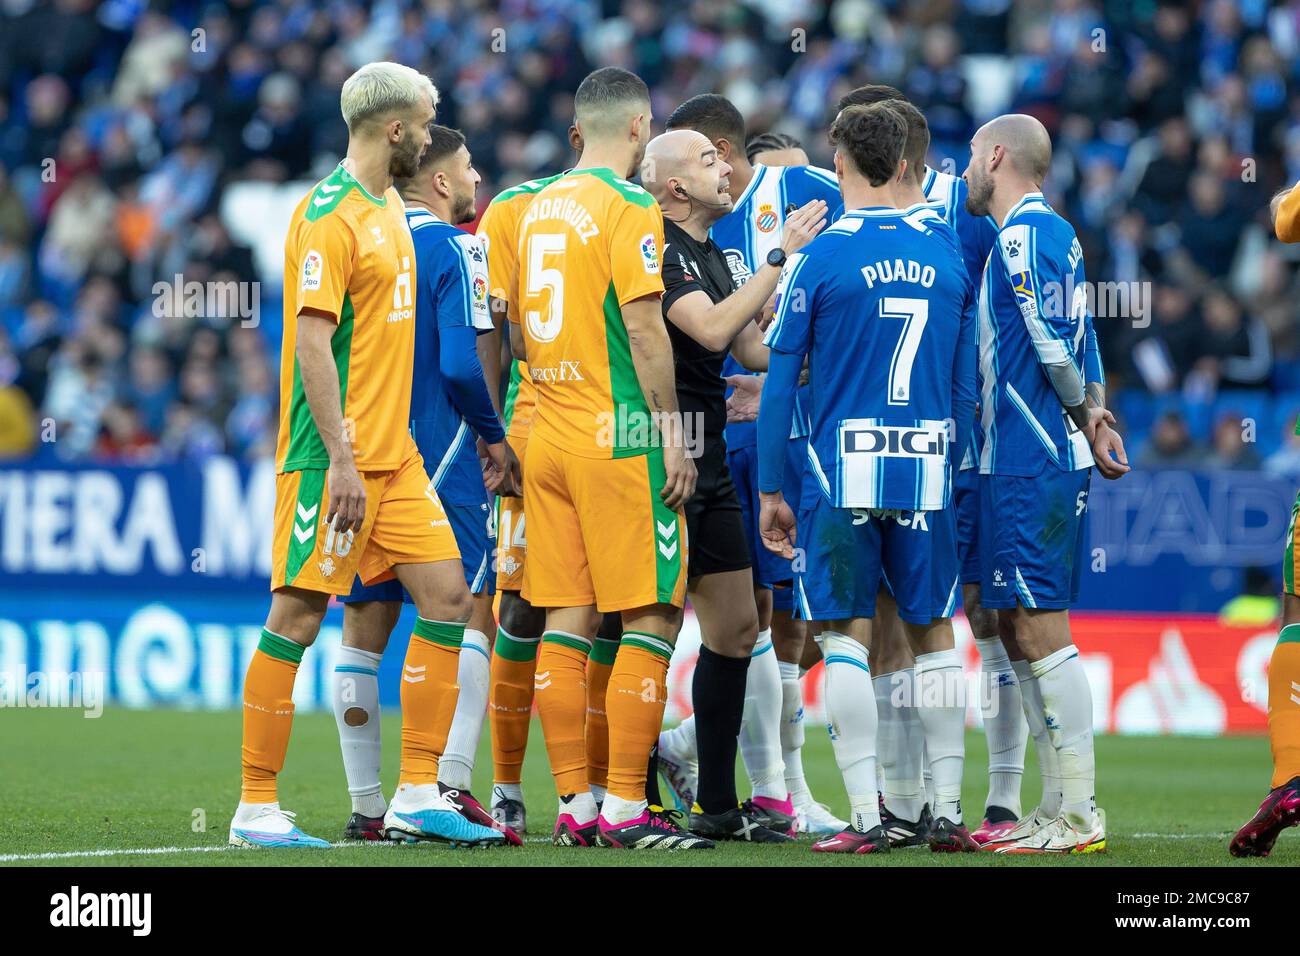 Referee during the Liga match between RCD Espanyol and Real Betis at RCDE Stadium in Cornella, Spain. Stock Photo